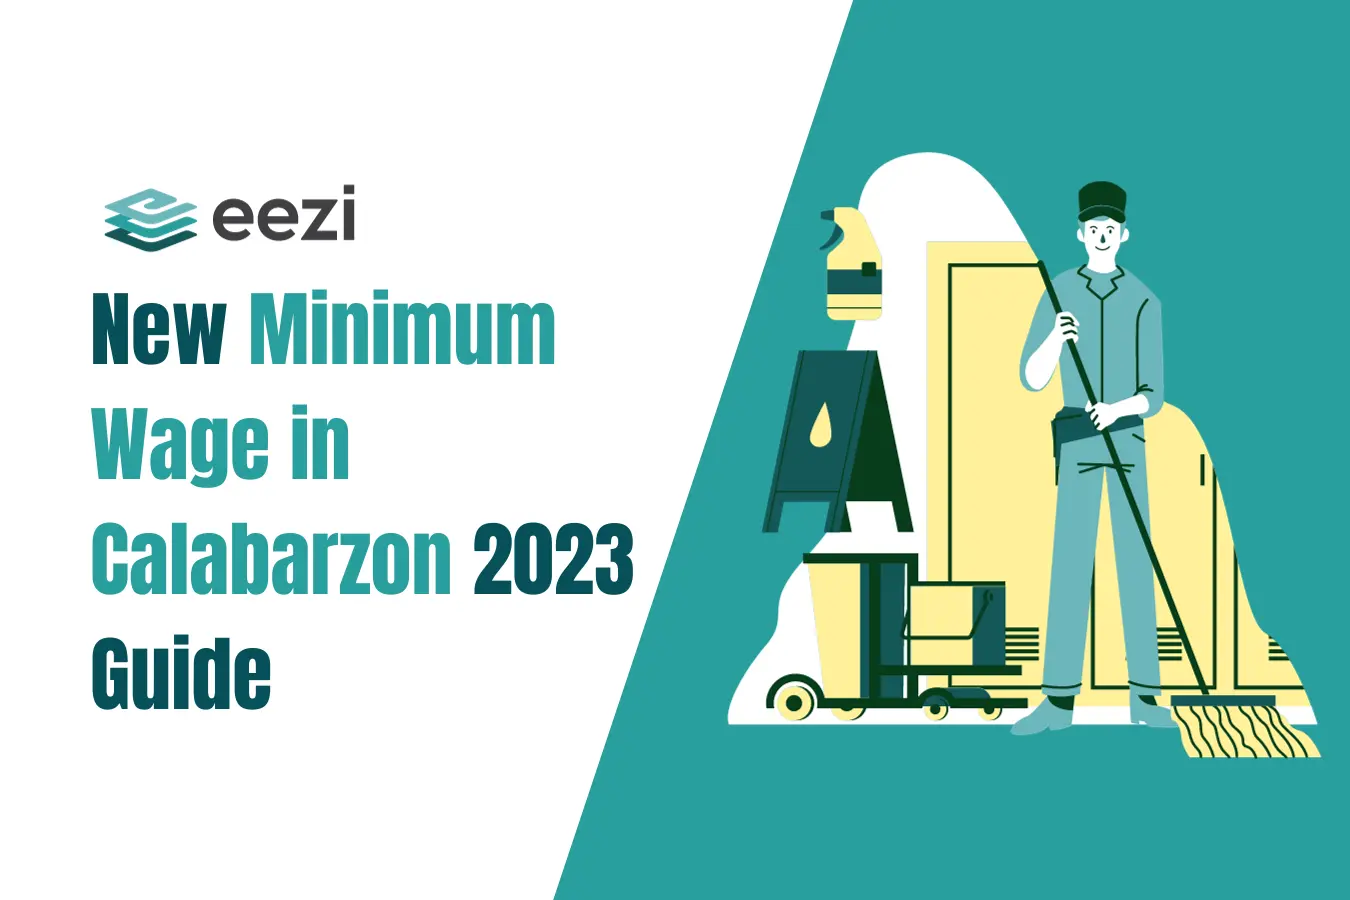 New Minimum Wage in Calabarzon 2023 Guide